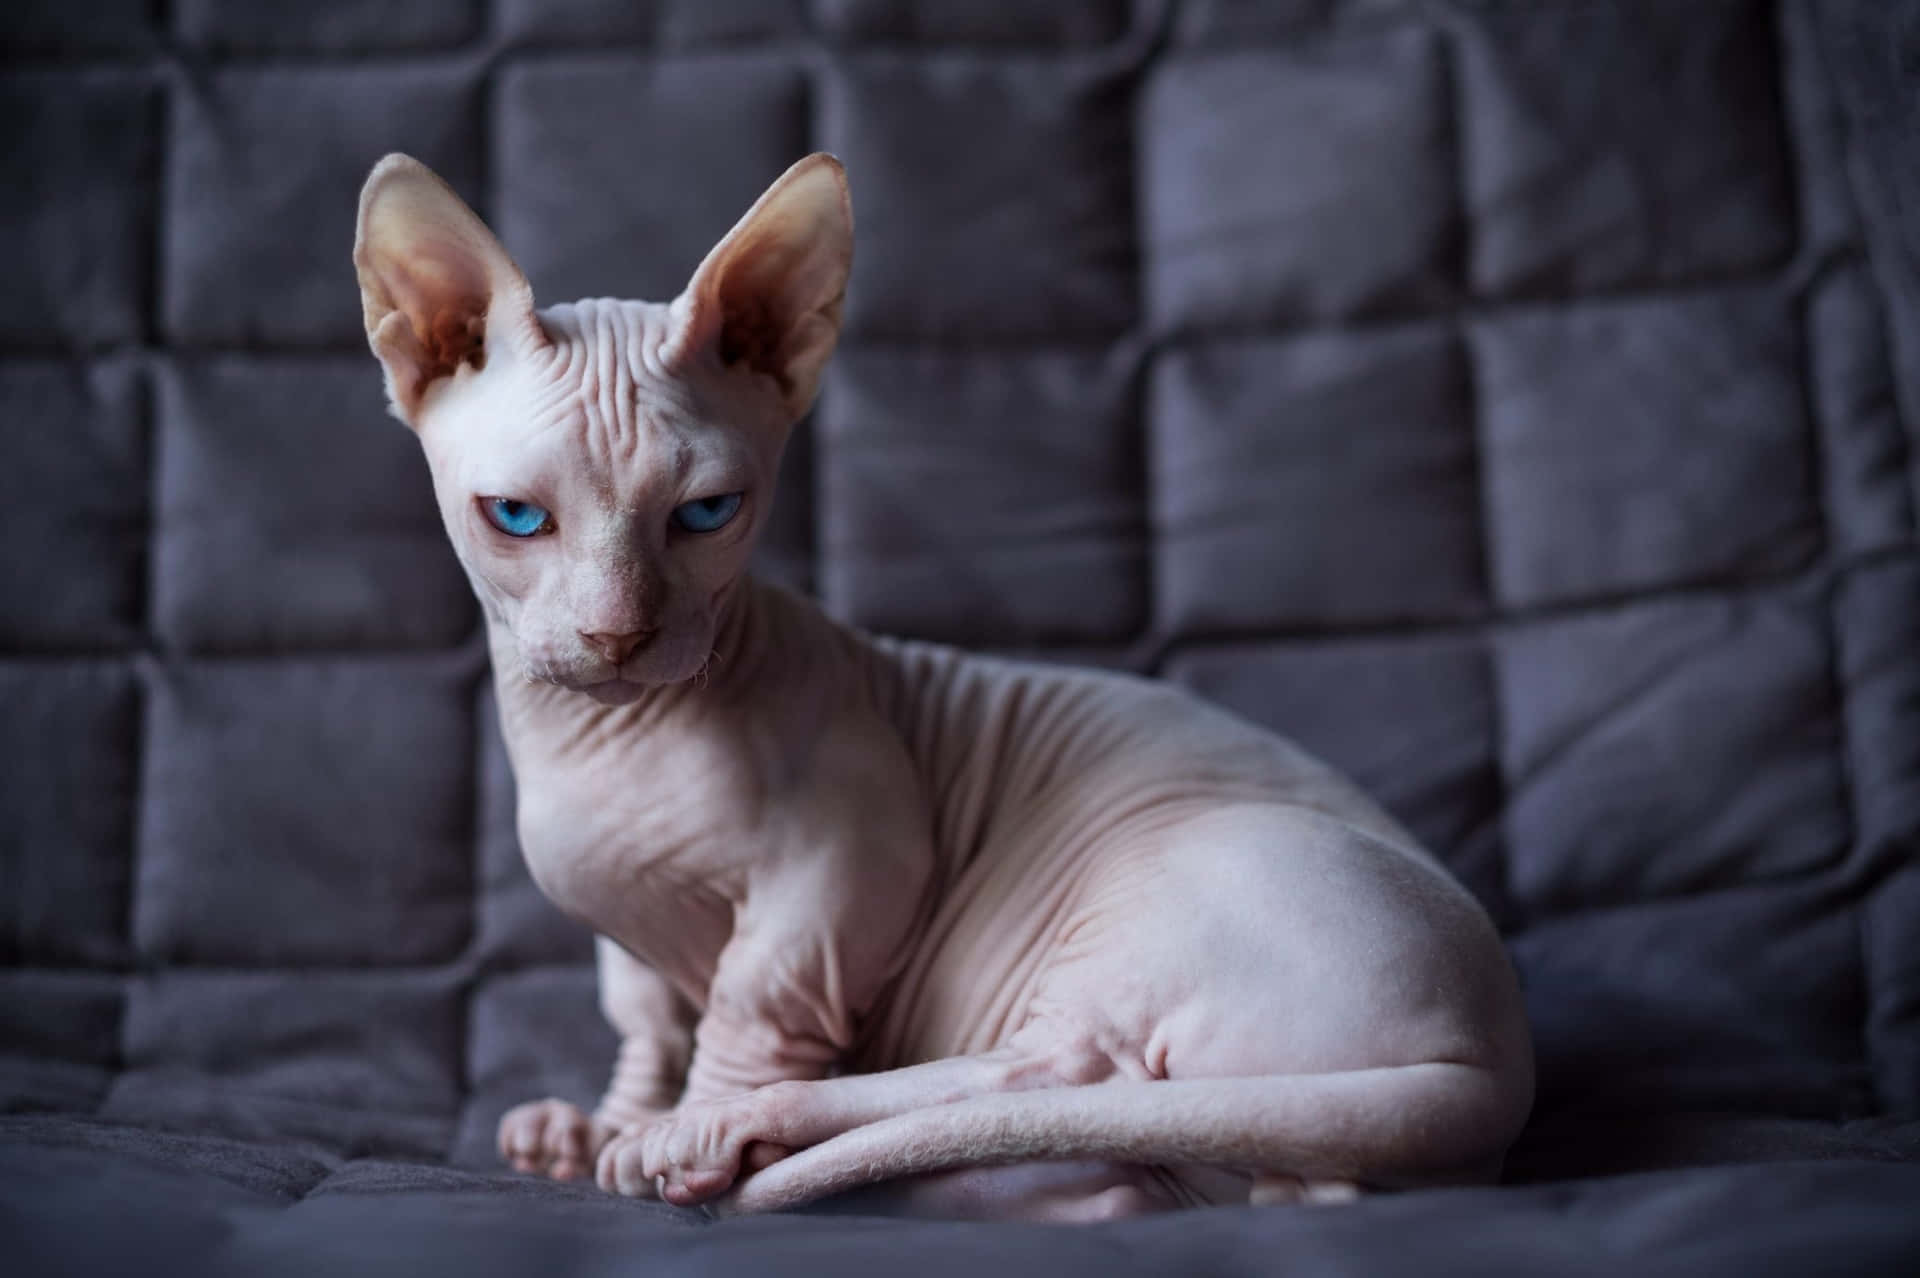 A Sphynx Cat With Blue Eyes Sitting On A Couch